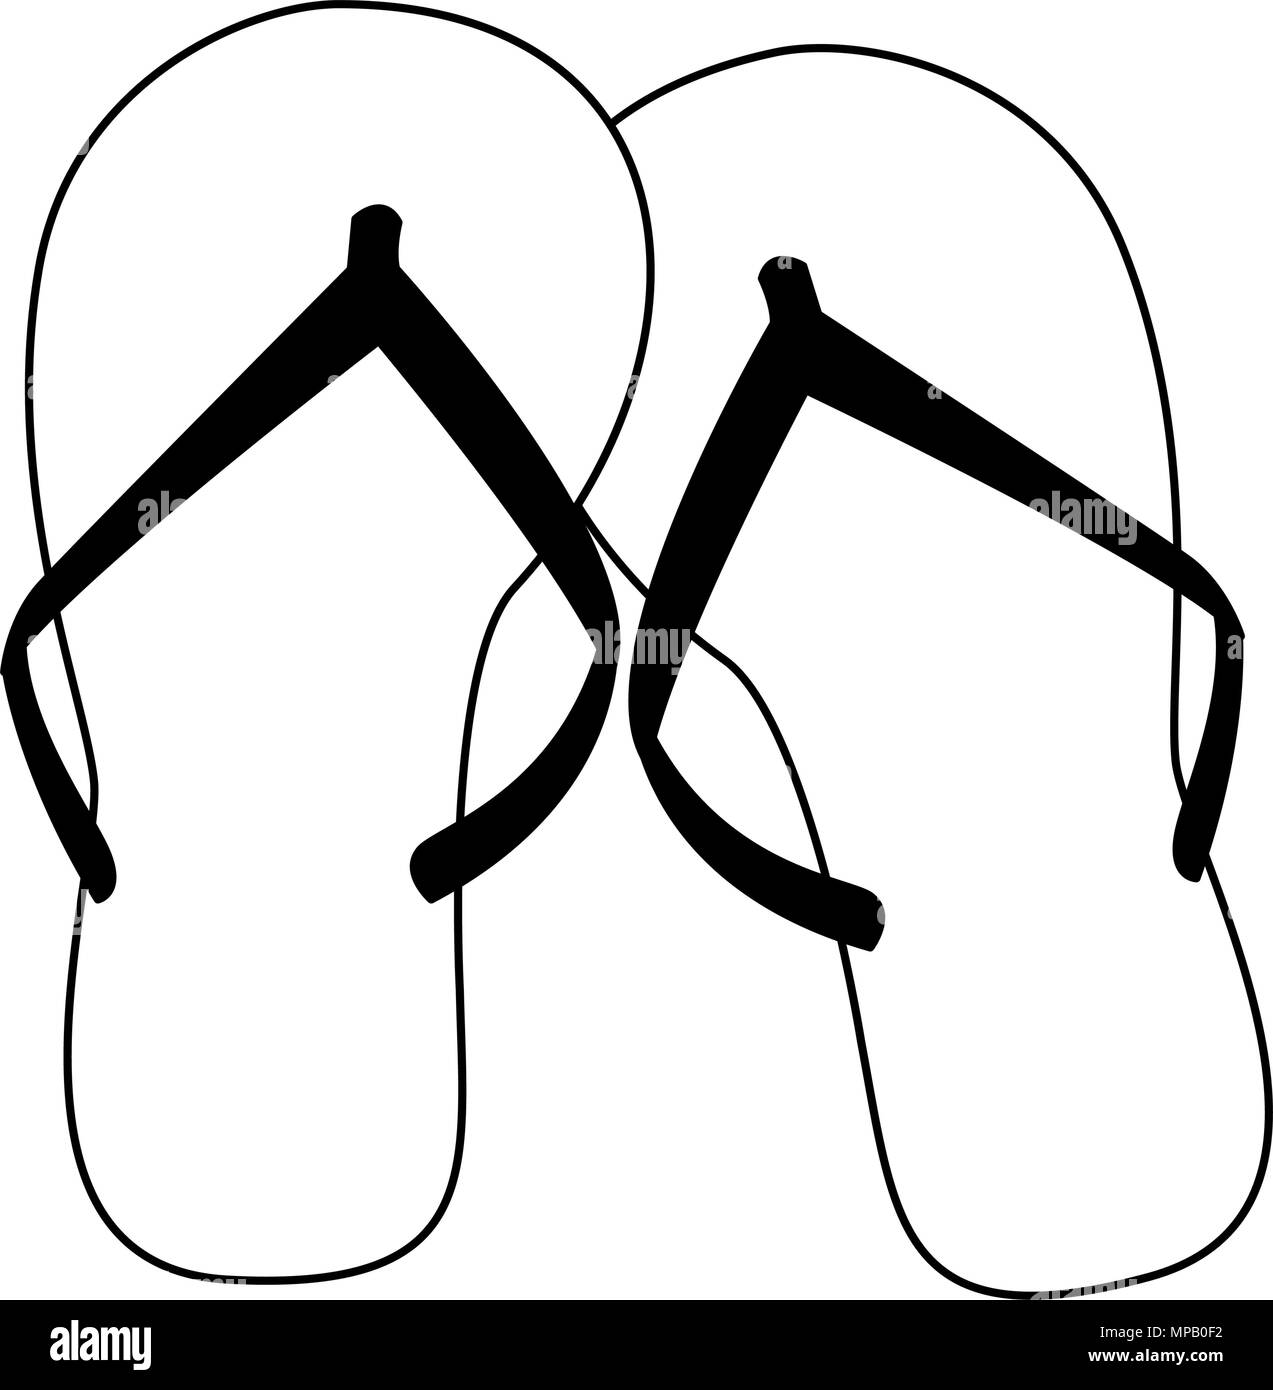 Flip flop sandals Black and White Stock Photos & Images - Alamy